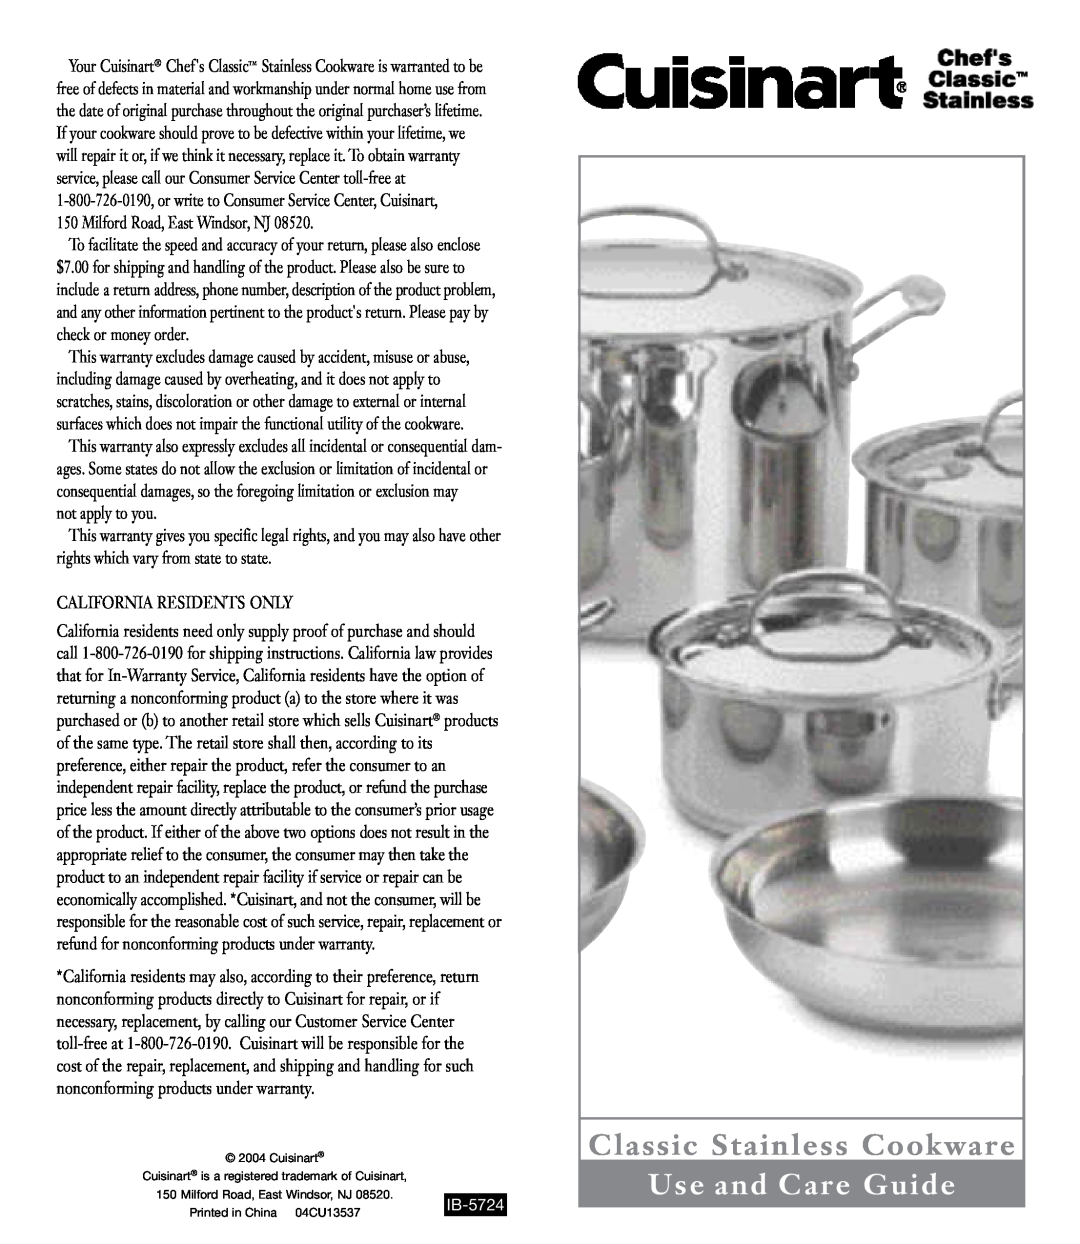 Cuisinart IB-5724, 766-26, 77-412, 77-10 warranty Classic Stainless Cookware, Use and Care Guide 